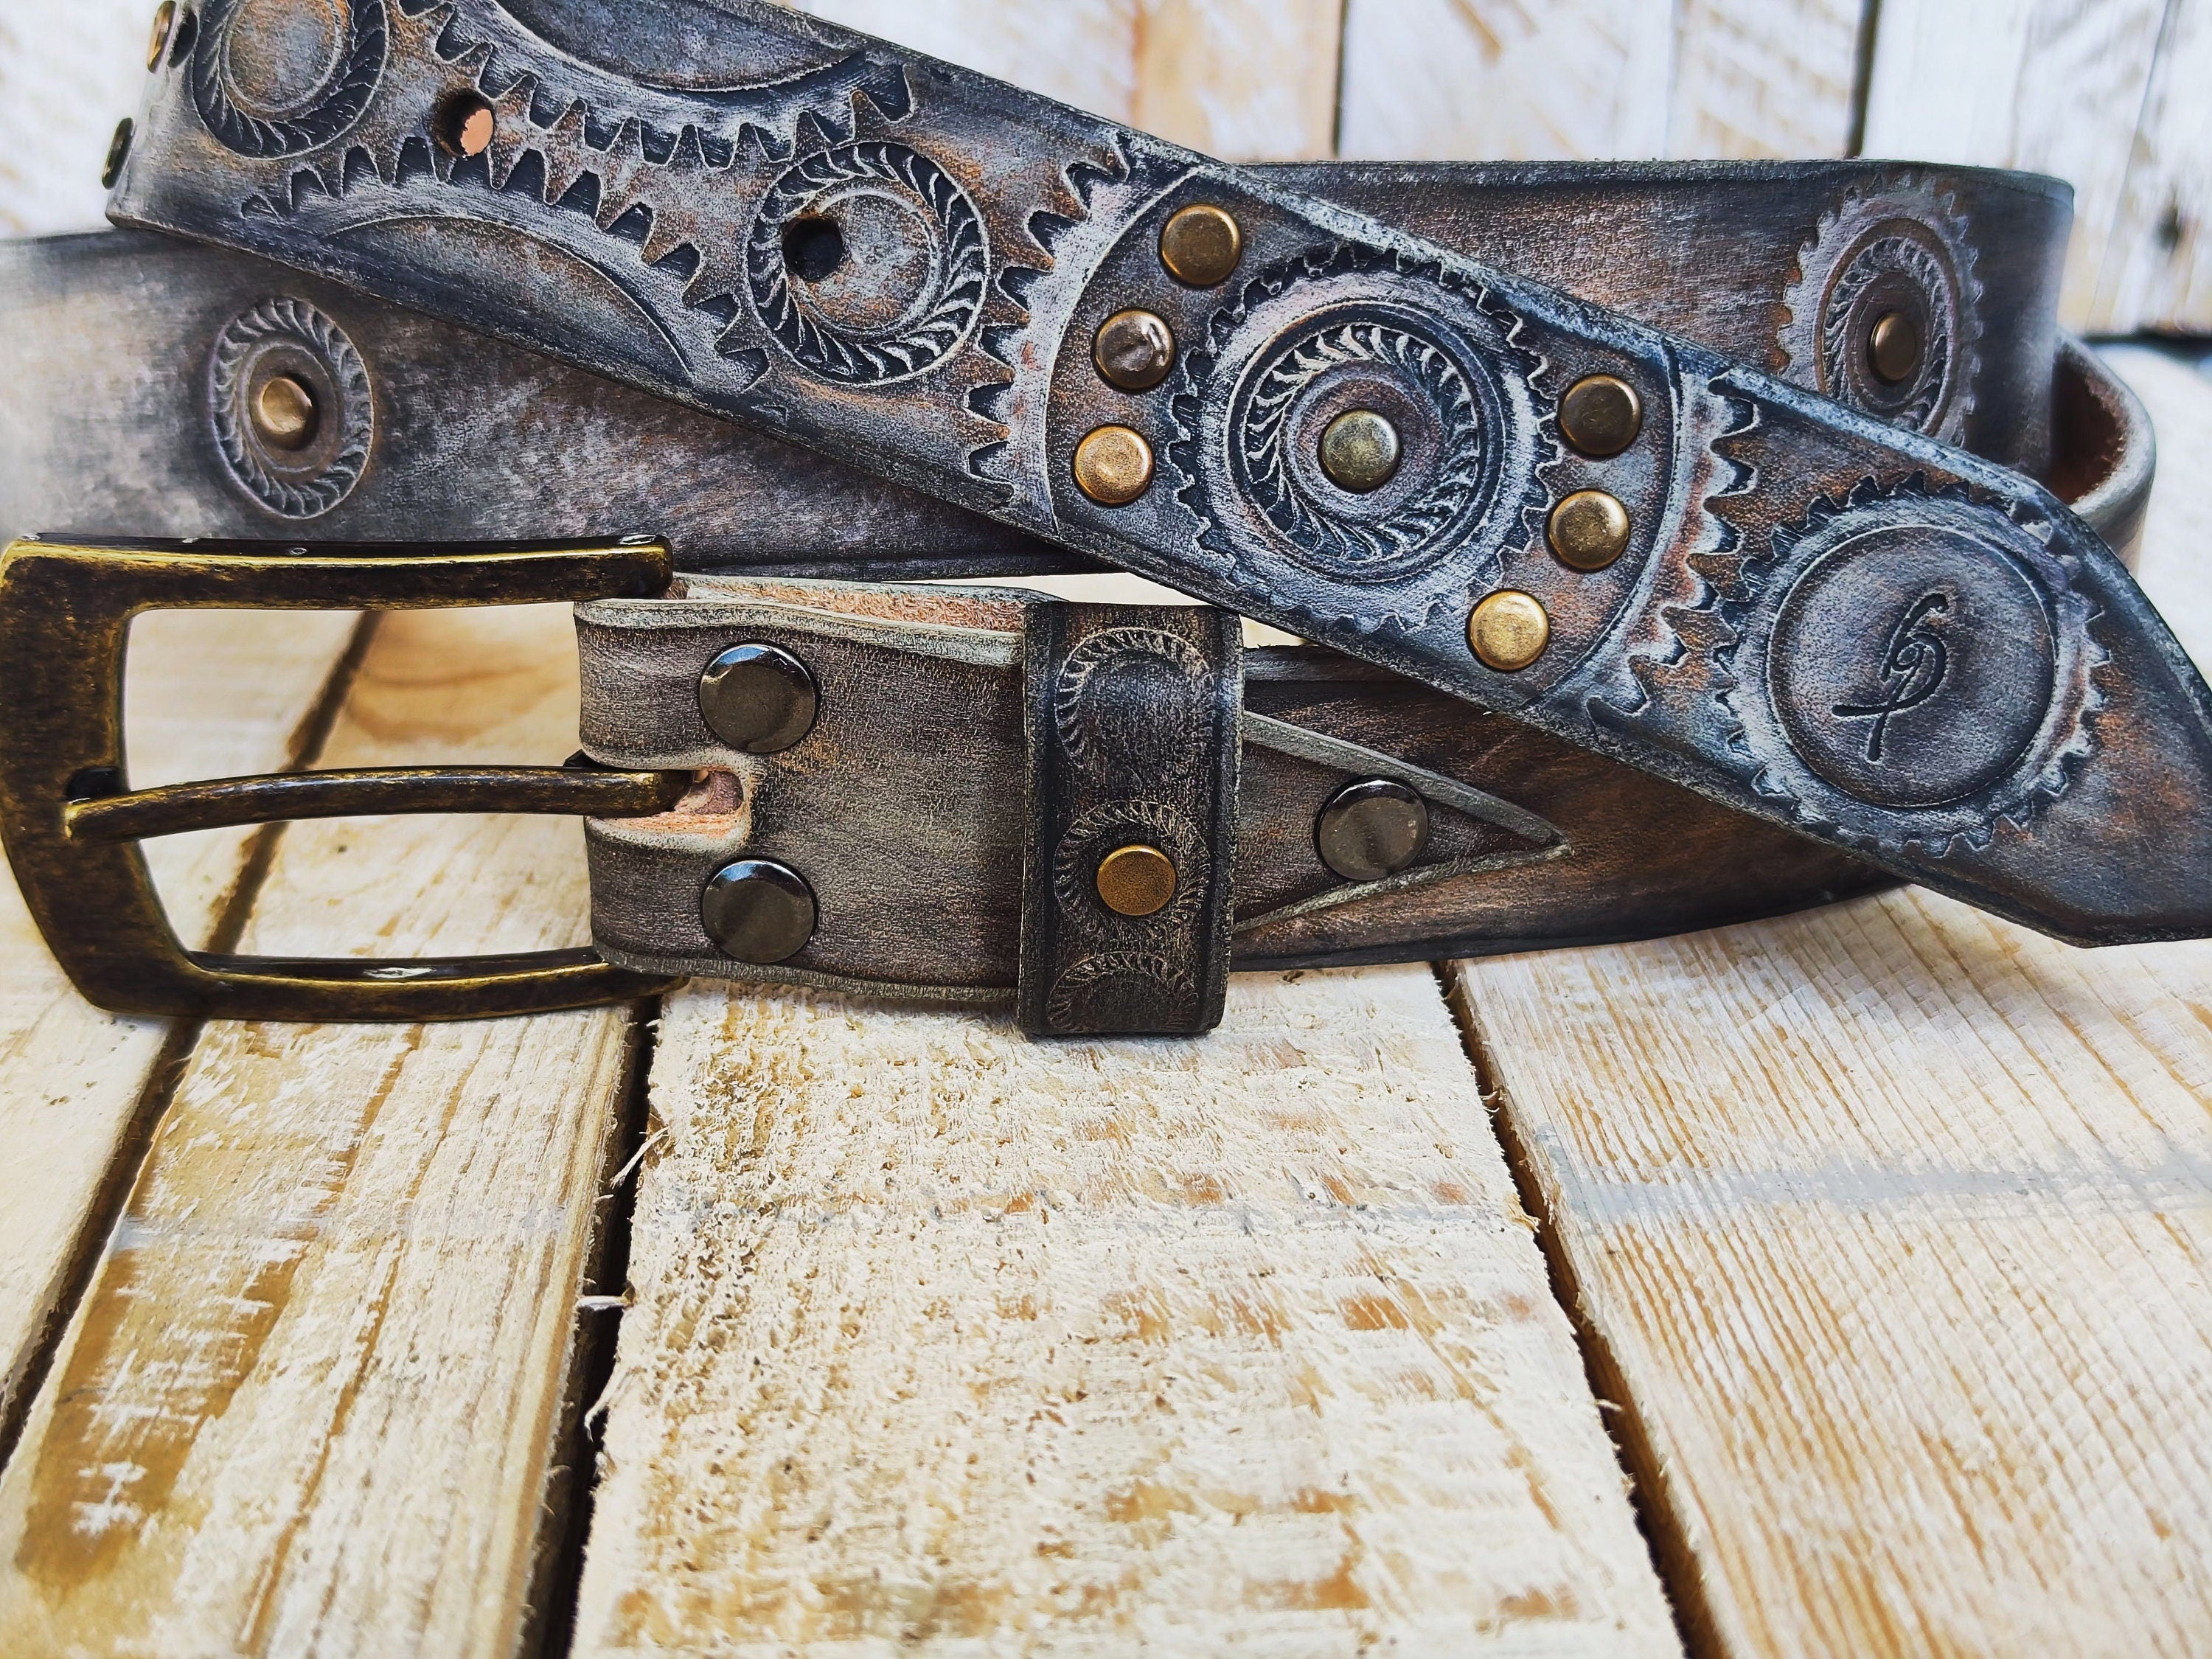 Rugged Handmade Leather Belt: white and Vintage brown Wash designed with Motorcycle Gear Stamps, and studs.